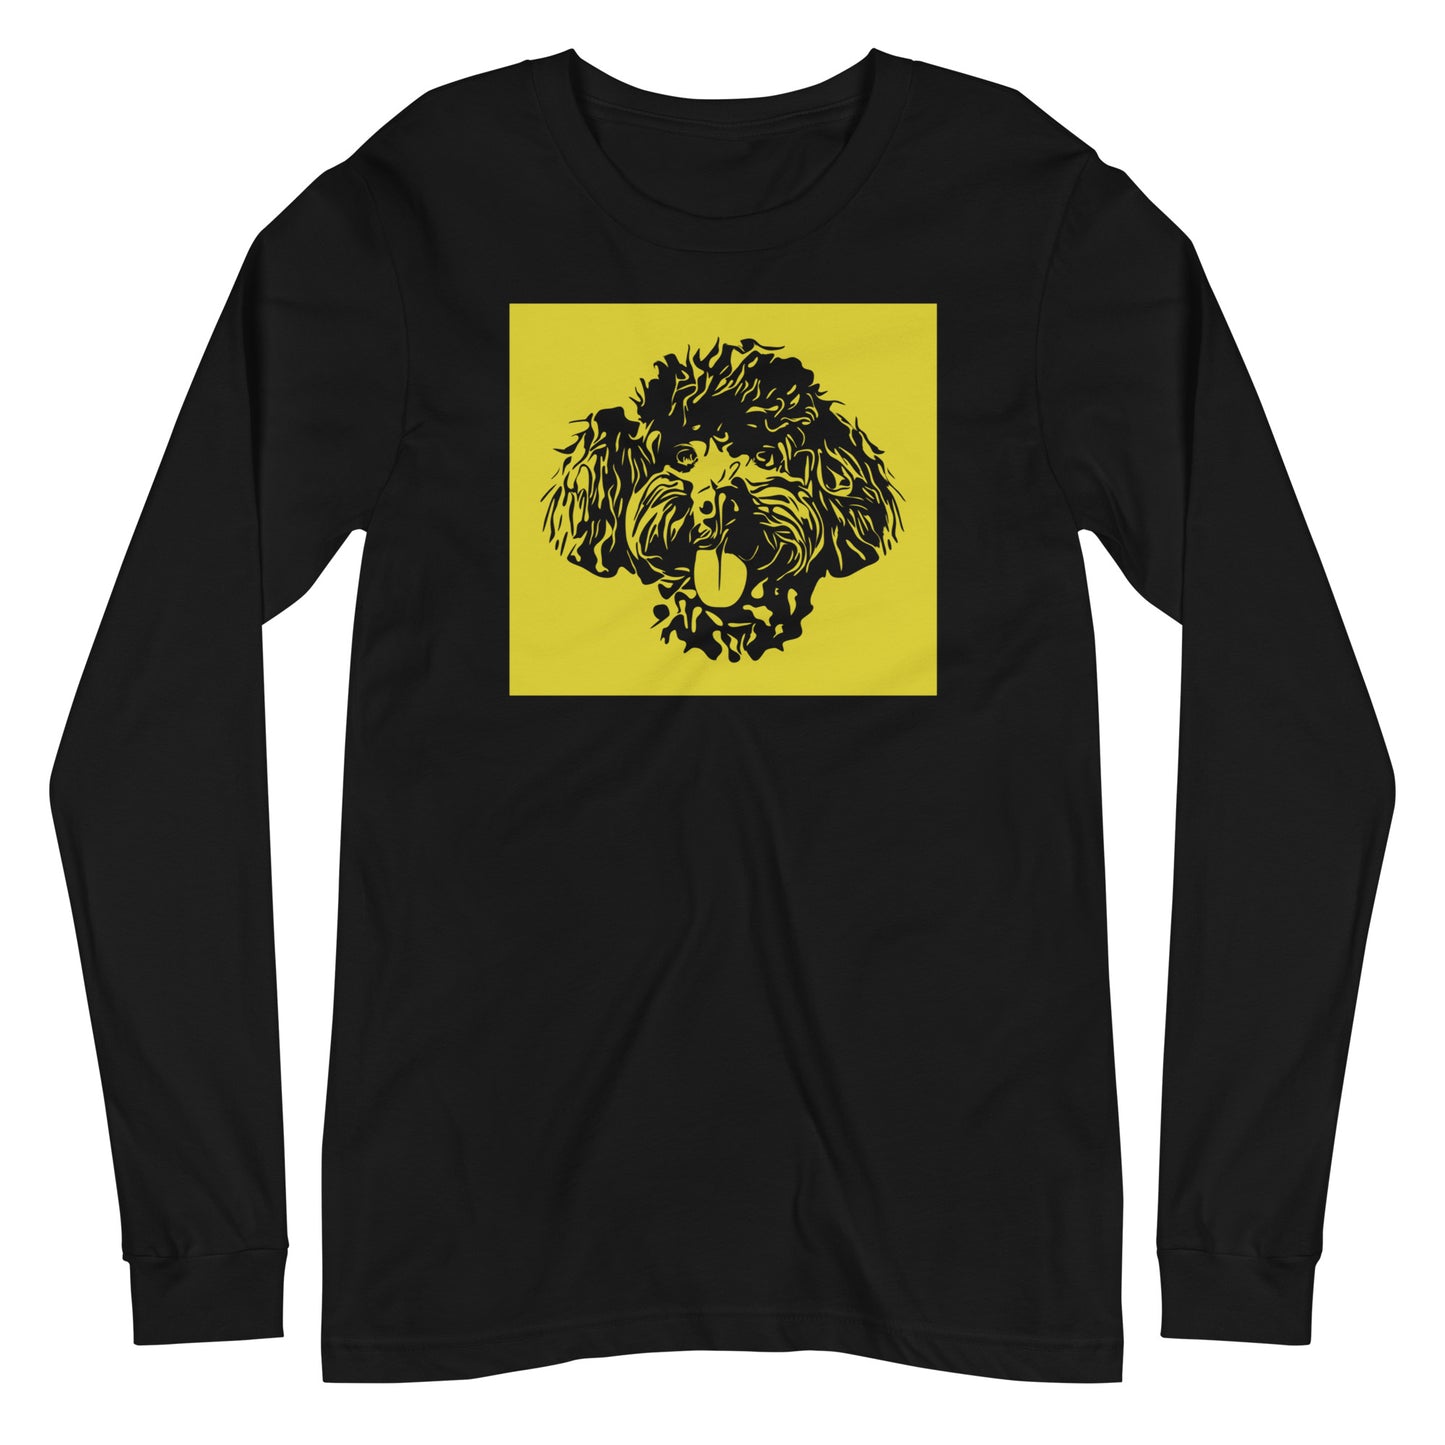 Toy Poodle face silhouette with yellow background square on unisex black long sleeve t-shirt